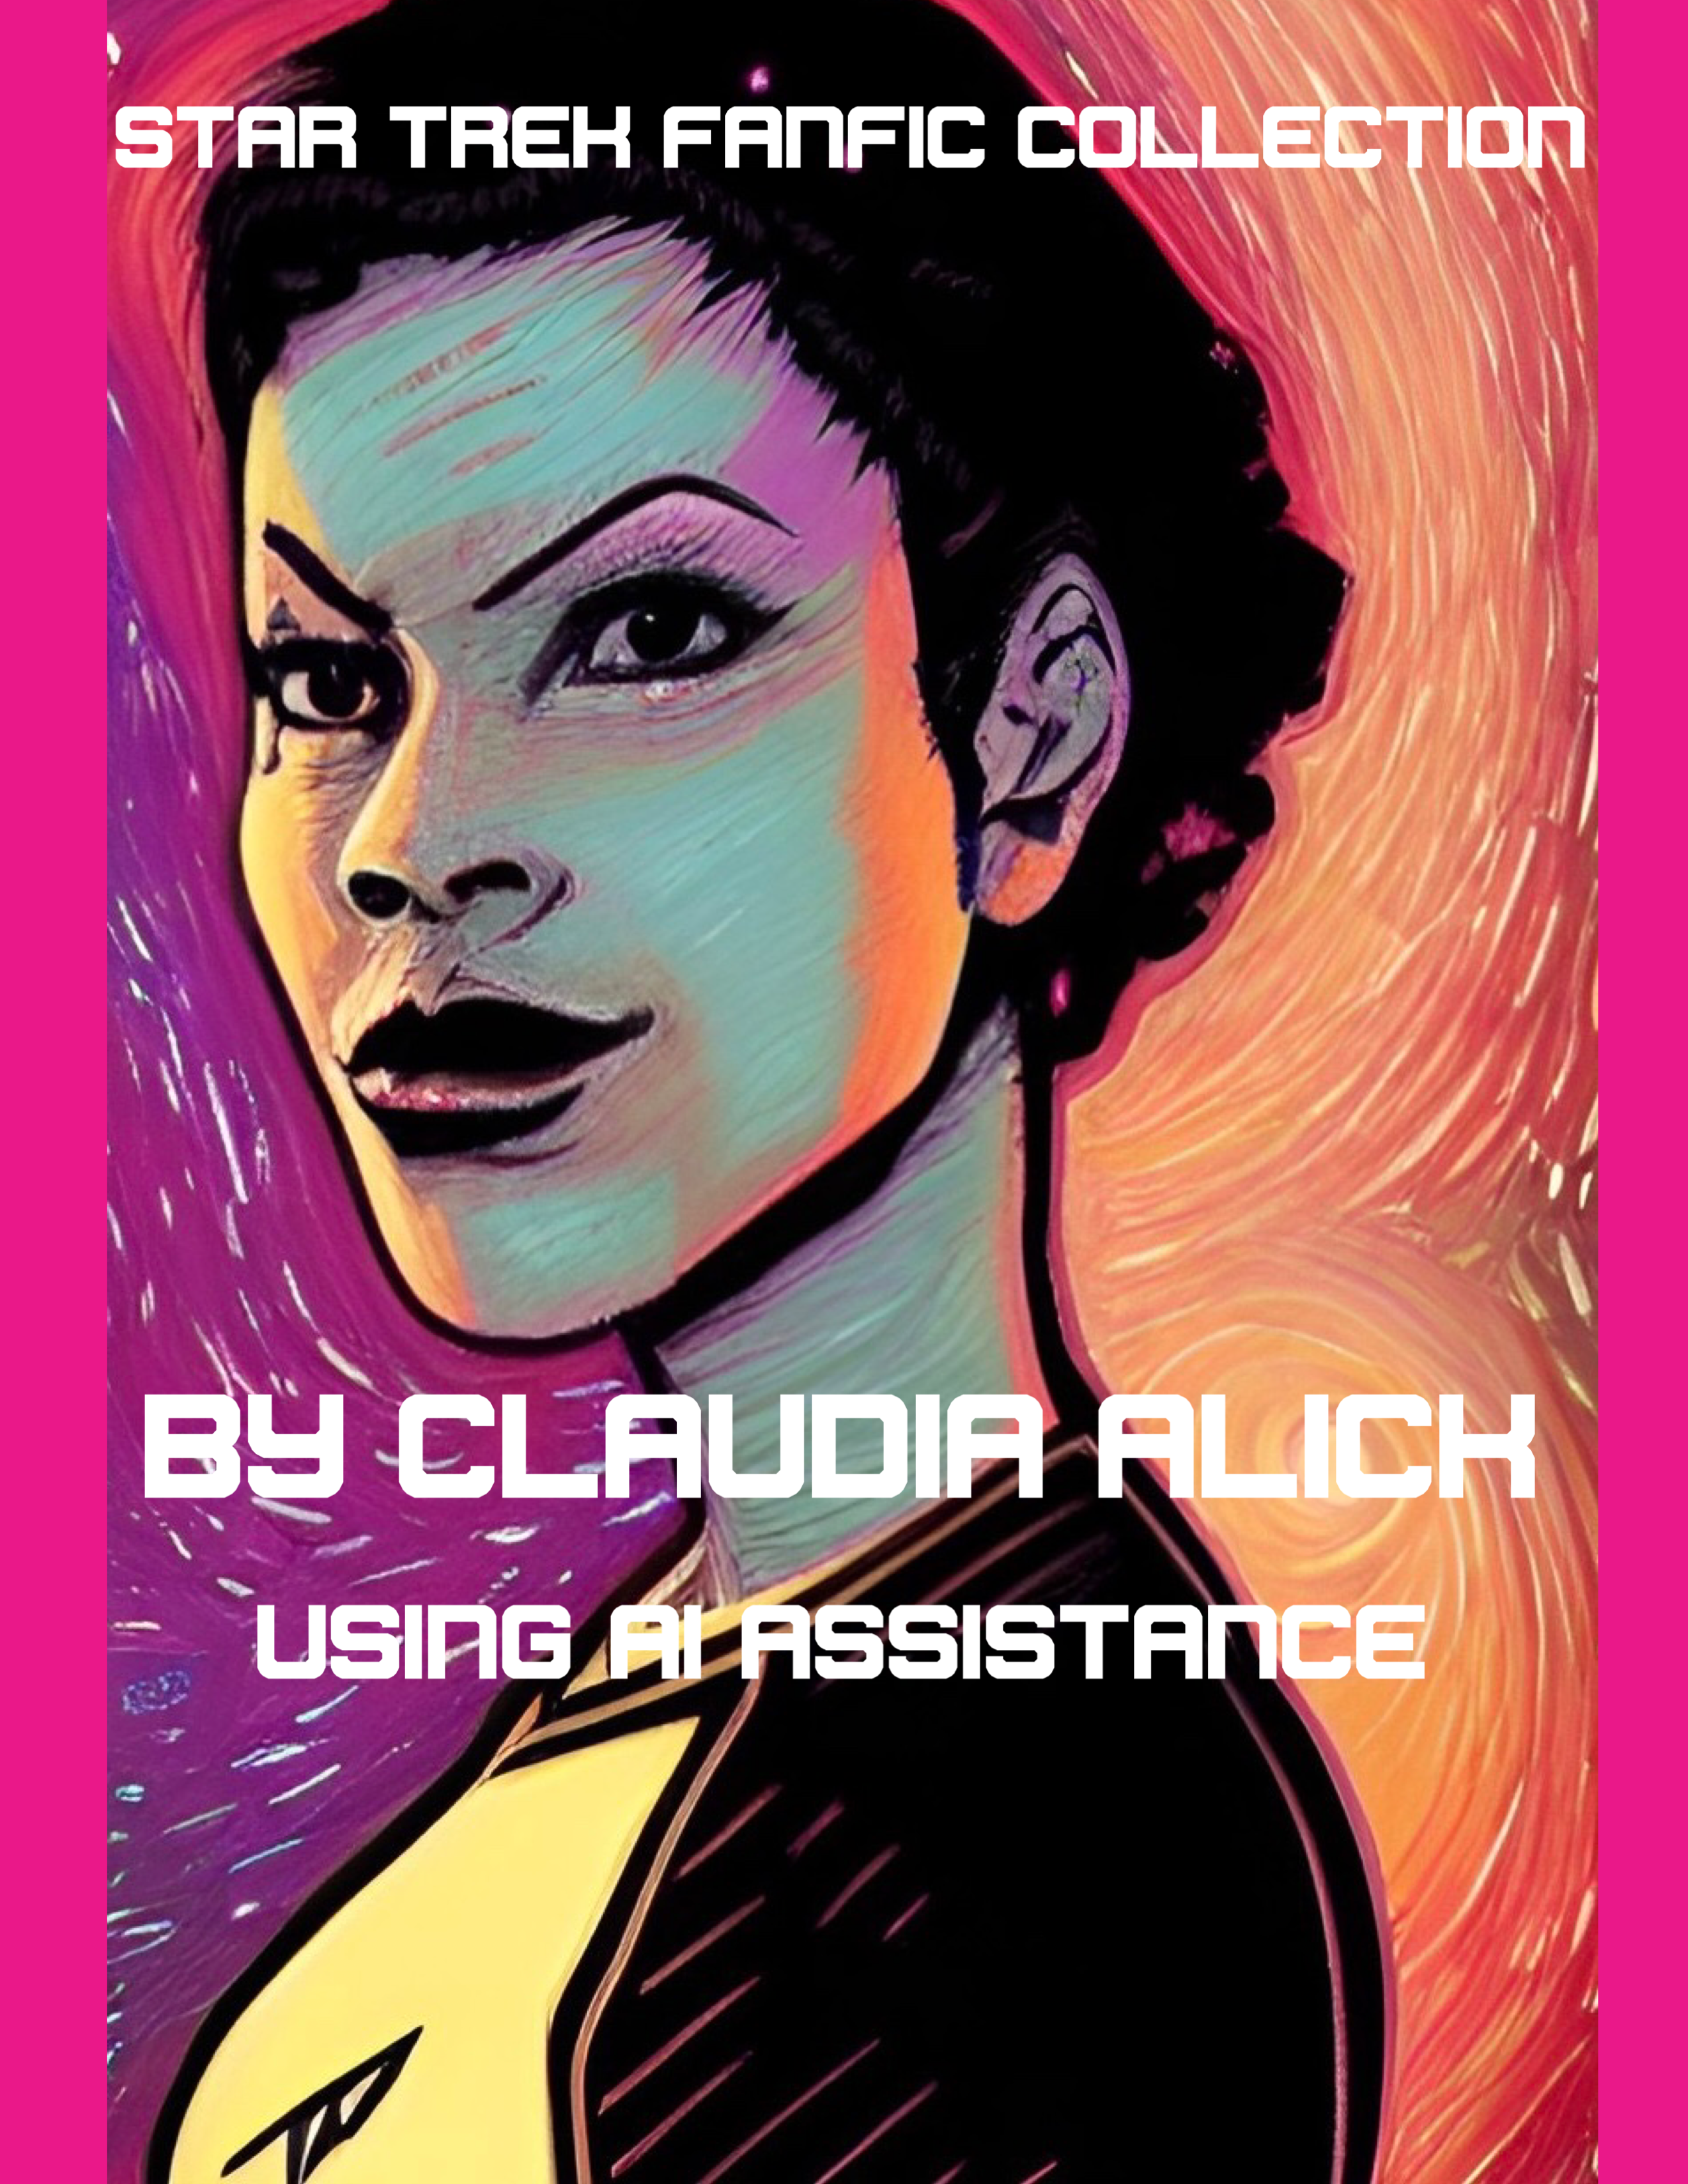 star trek fanfic collection by claudia alick made with ai assistance